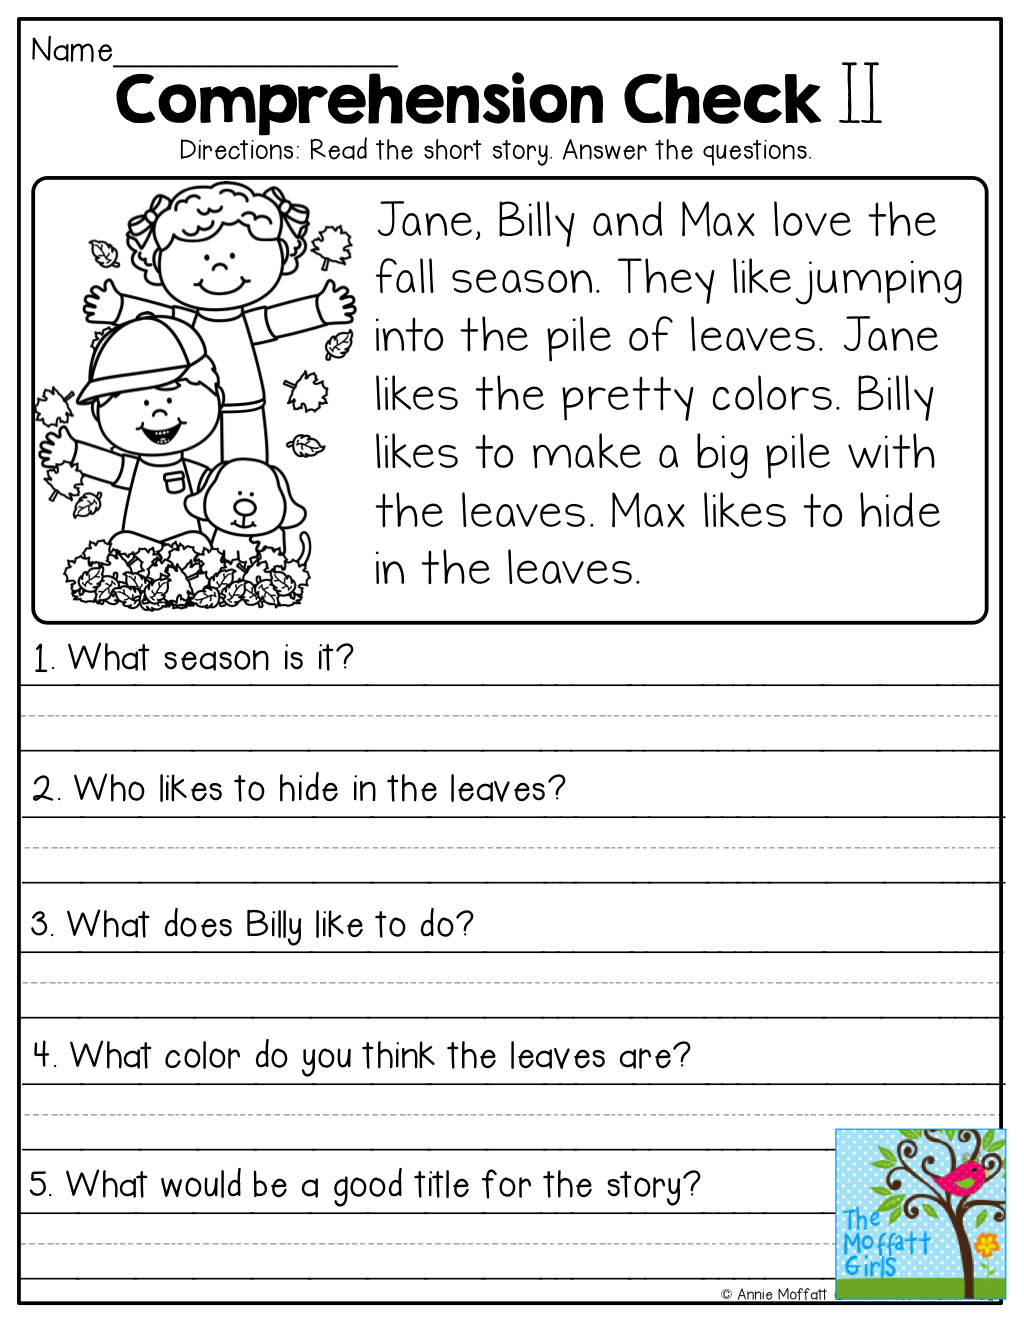 Comprehension Checks And So Many More Useful Printables! | Reading - Free Printable Grade 1 Reading Comprehension Worksheets